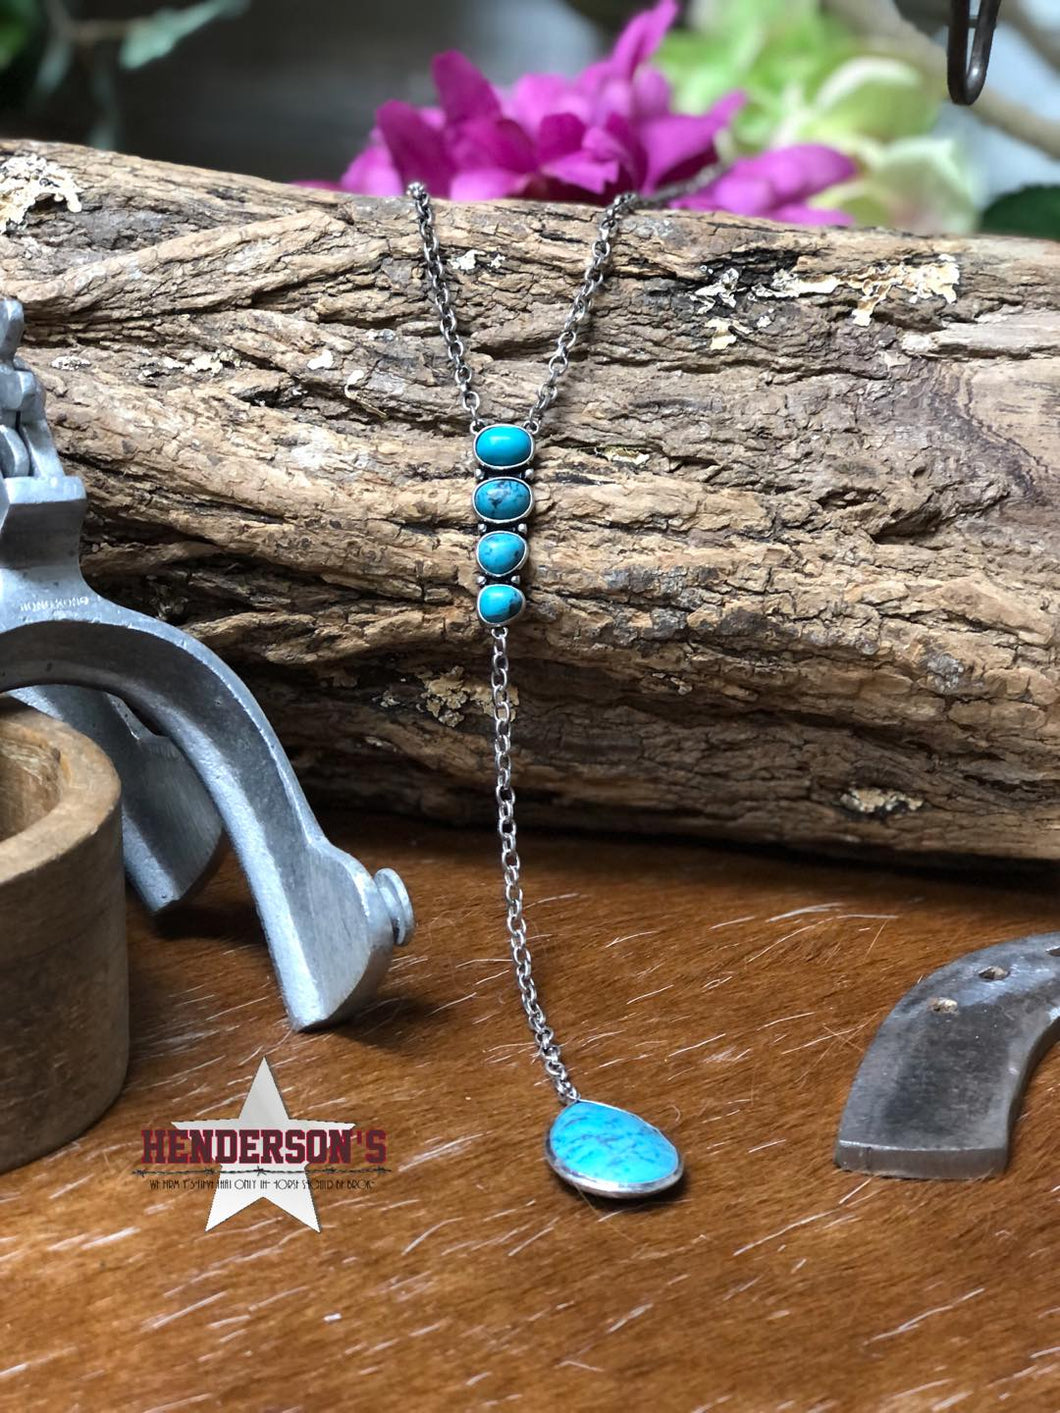 Turquoise Drop Necklace - Henderson's Western Store